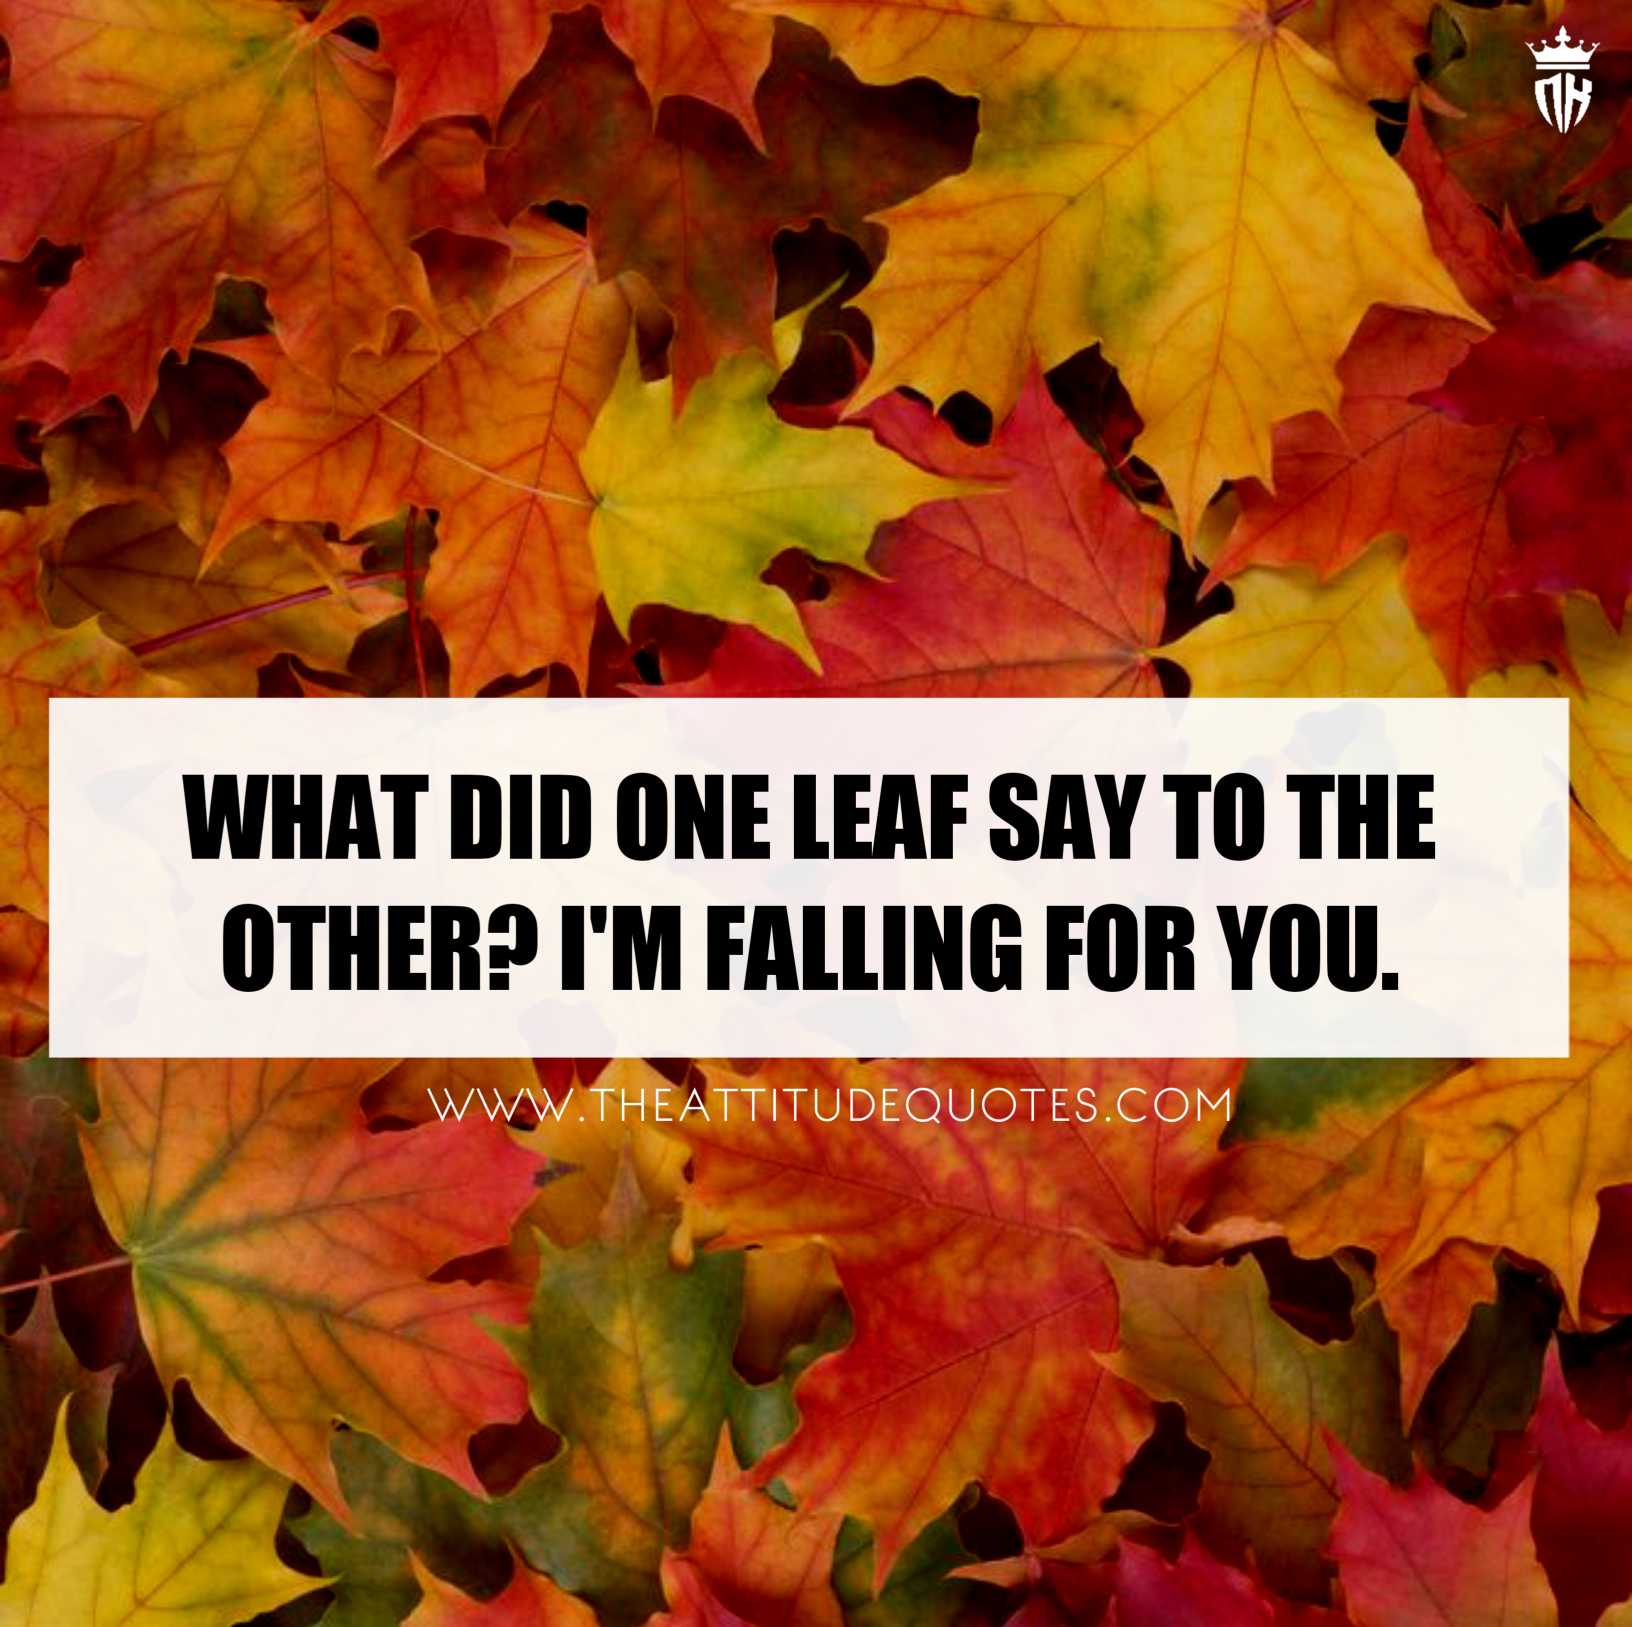 Fall Quotes And Image 2021. Autumn Quotes. Best Quotes About Autumn